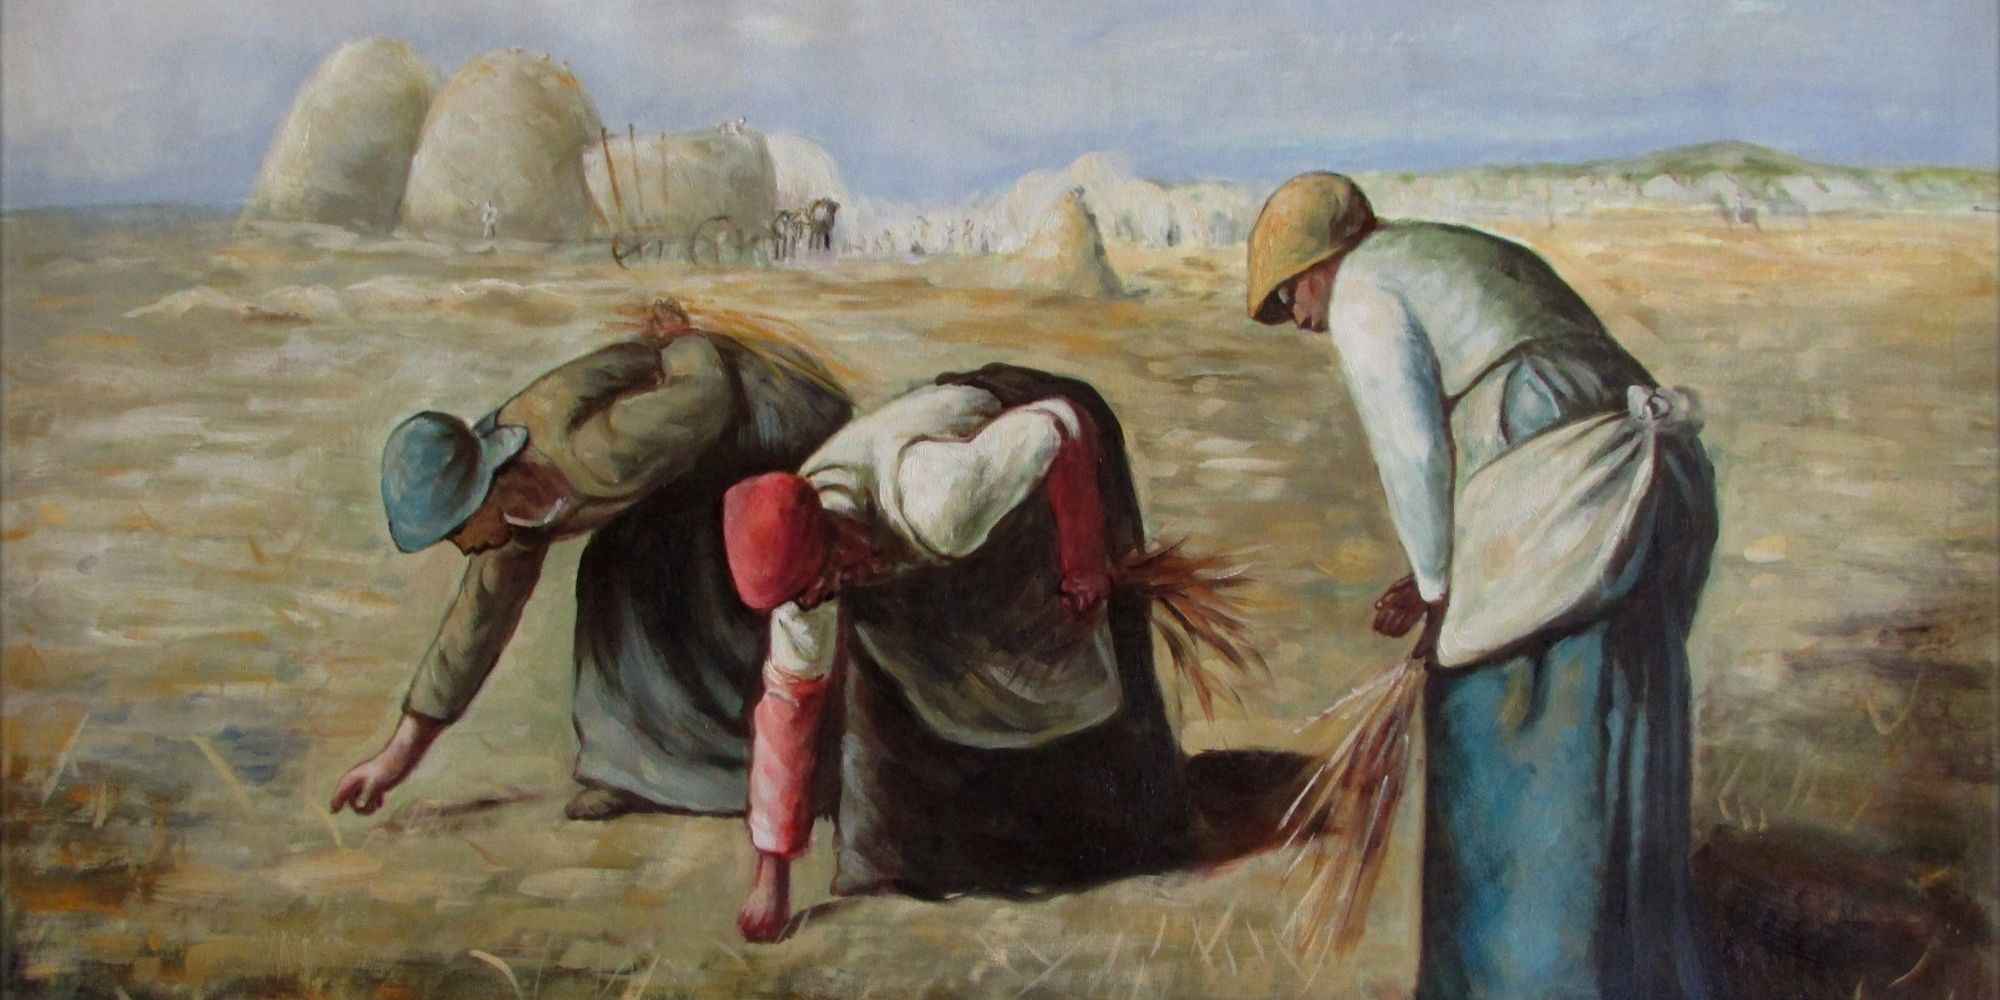 The Gleaners, by artist Jean-François Millet